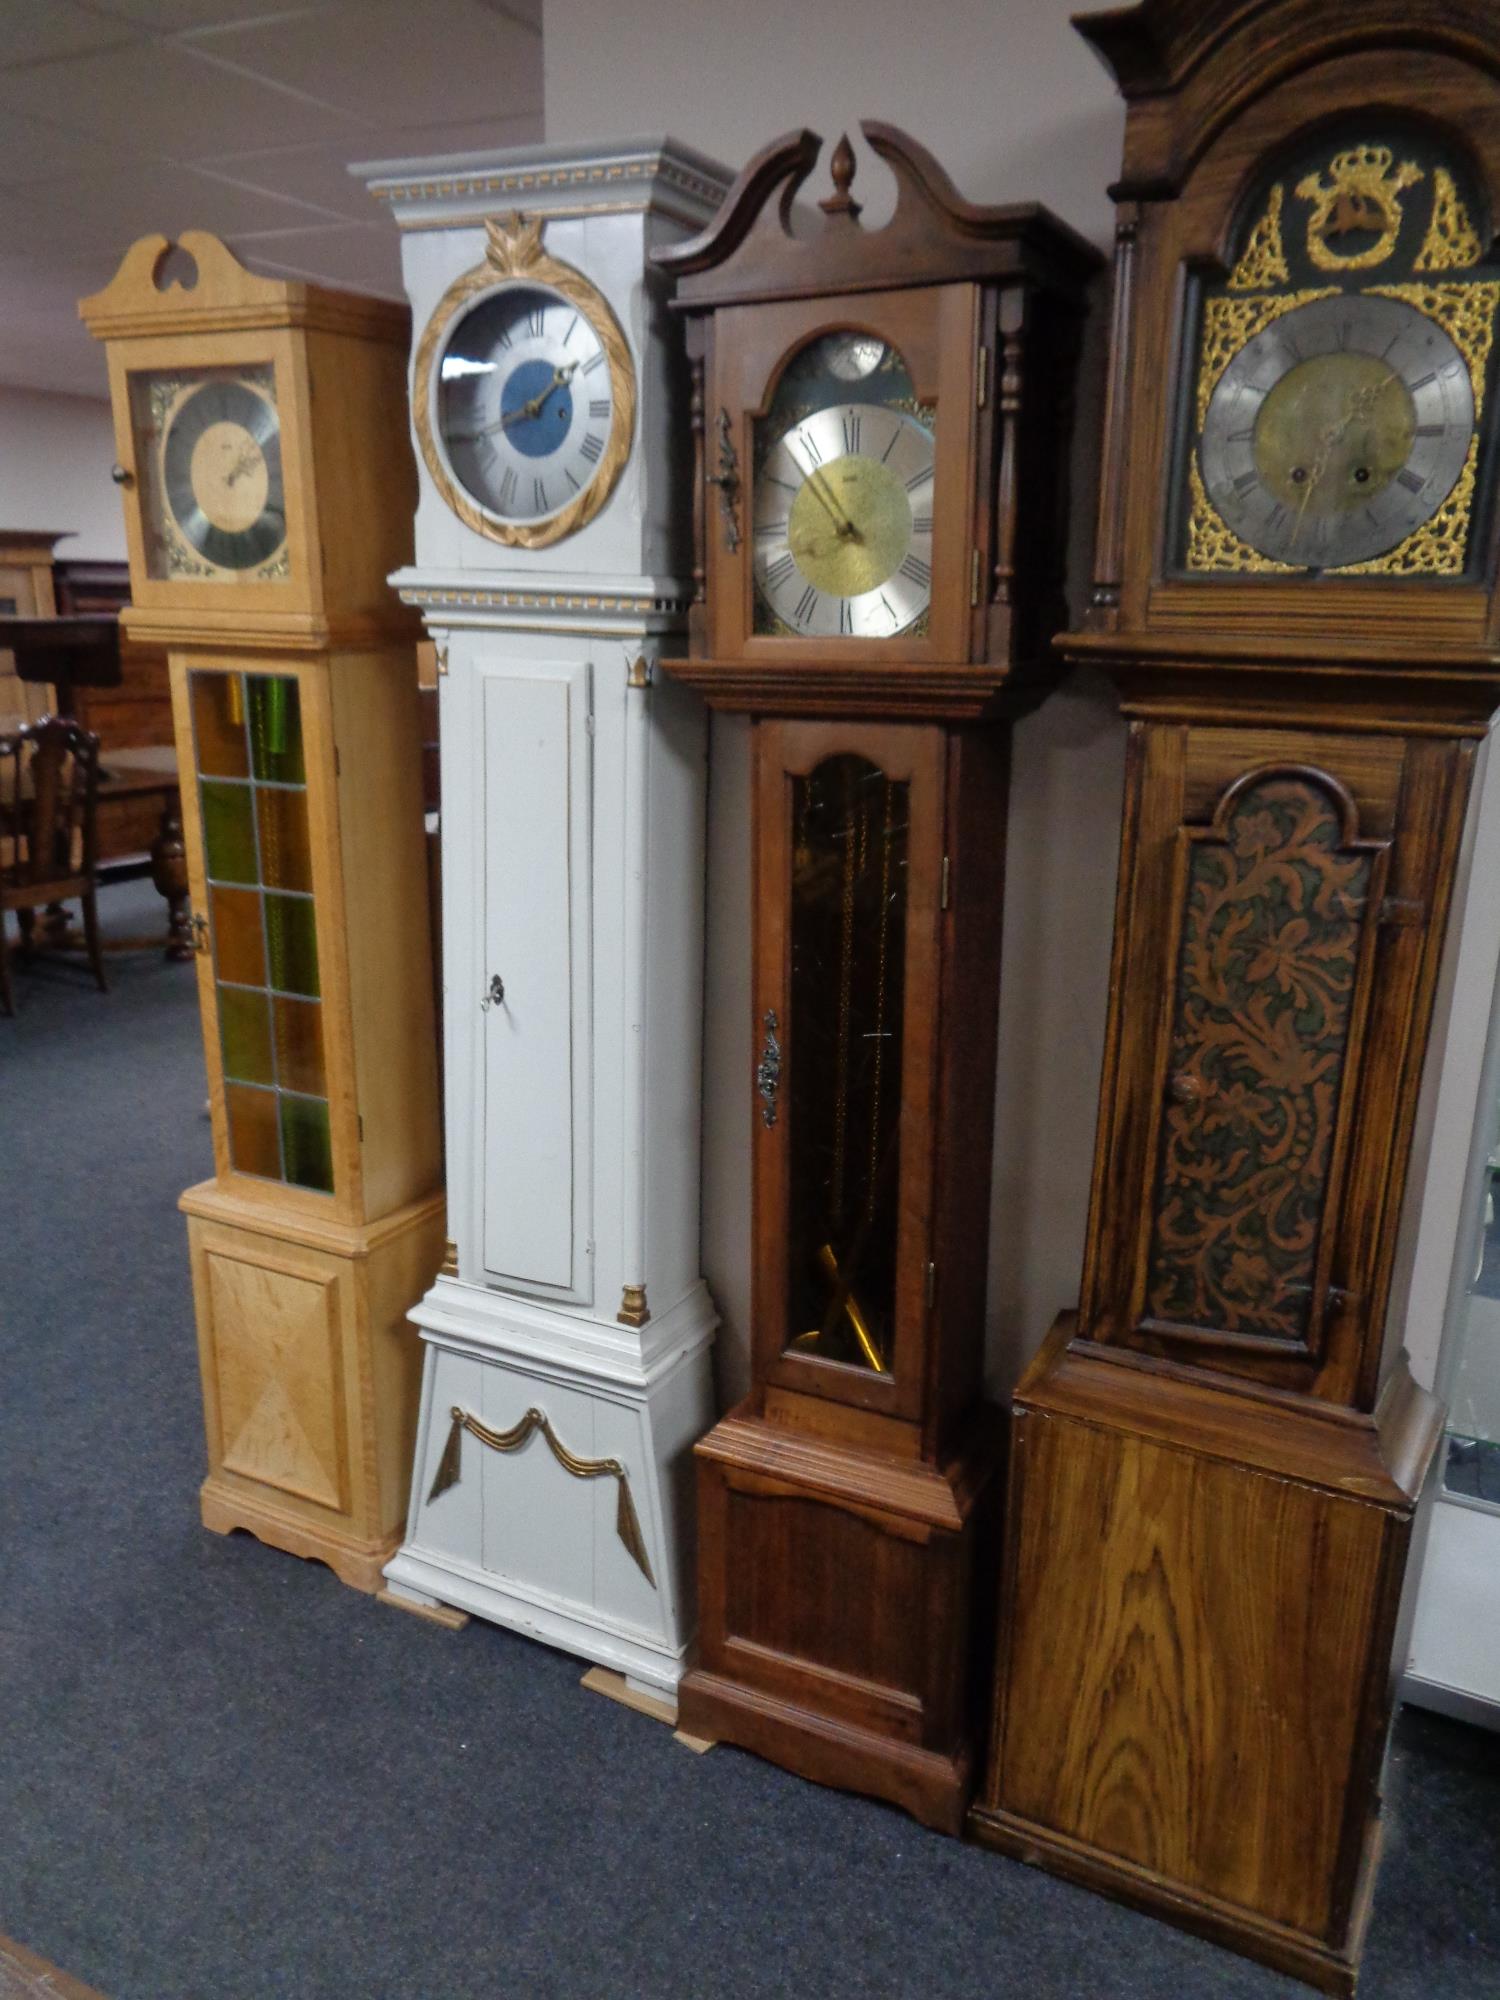 A Brixon Tempus Fugit longcase clock with pendulum and weights. - Image 2 of 2